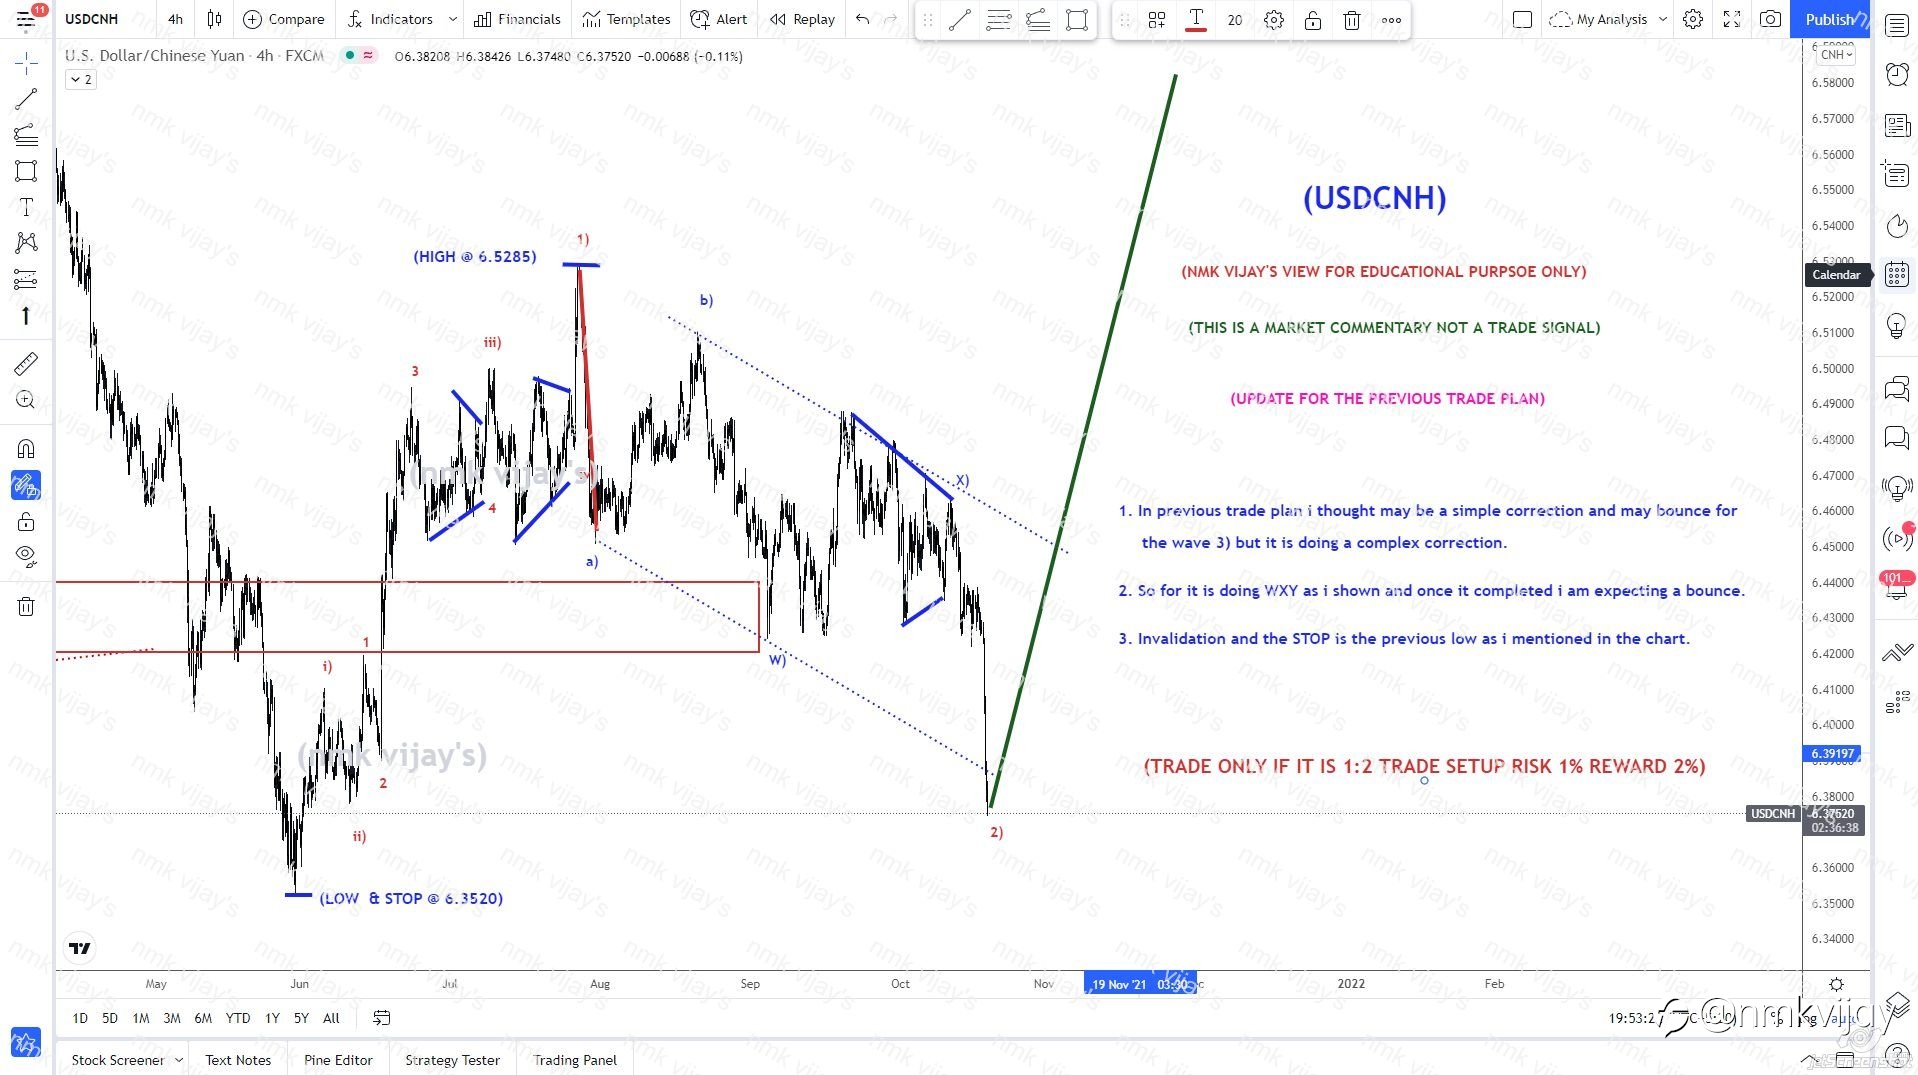 USDCNH-Expecting a bounce for wave 3) and wave 2) completed ???